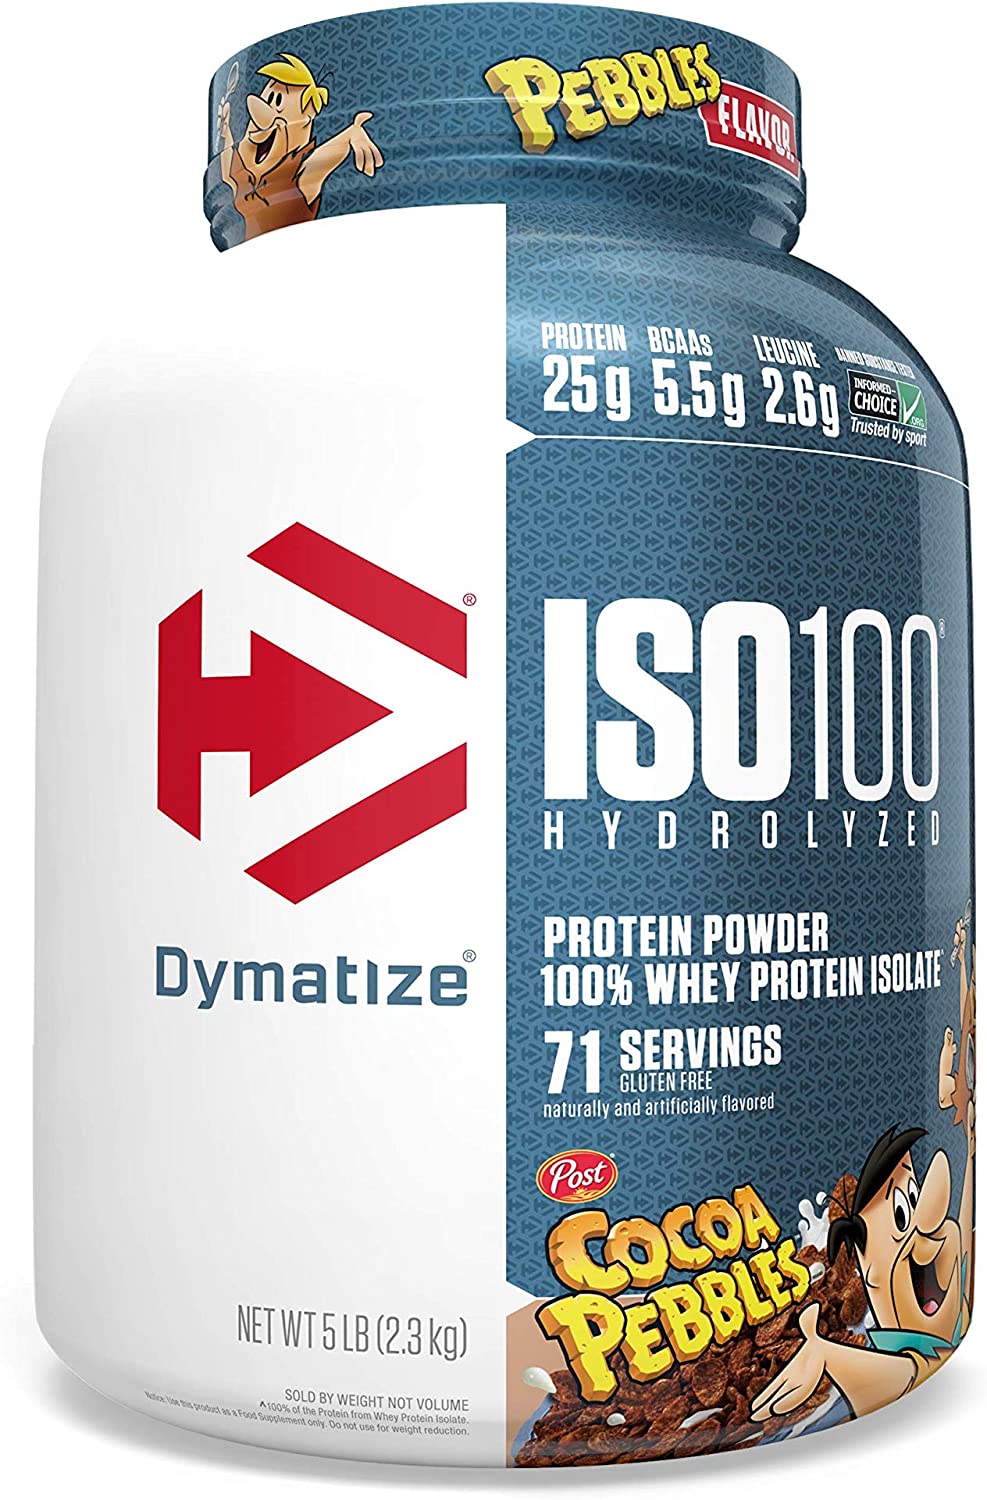 5-lbs Dymatize ISO100 Hydrolyzed Protein Powder: Cocoa Pebbles $51, Vanilla $57.10 & More w/ S&S + Free Shipping